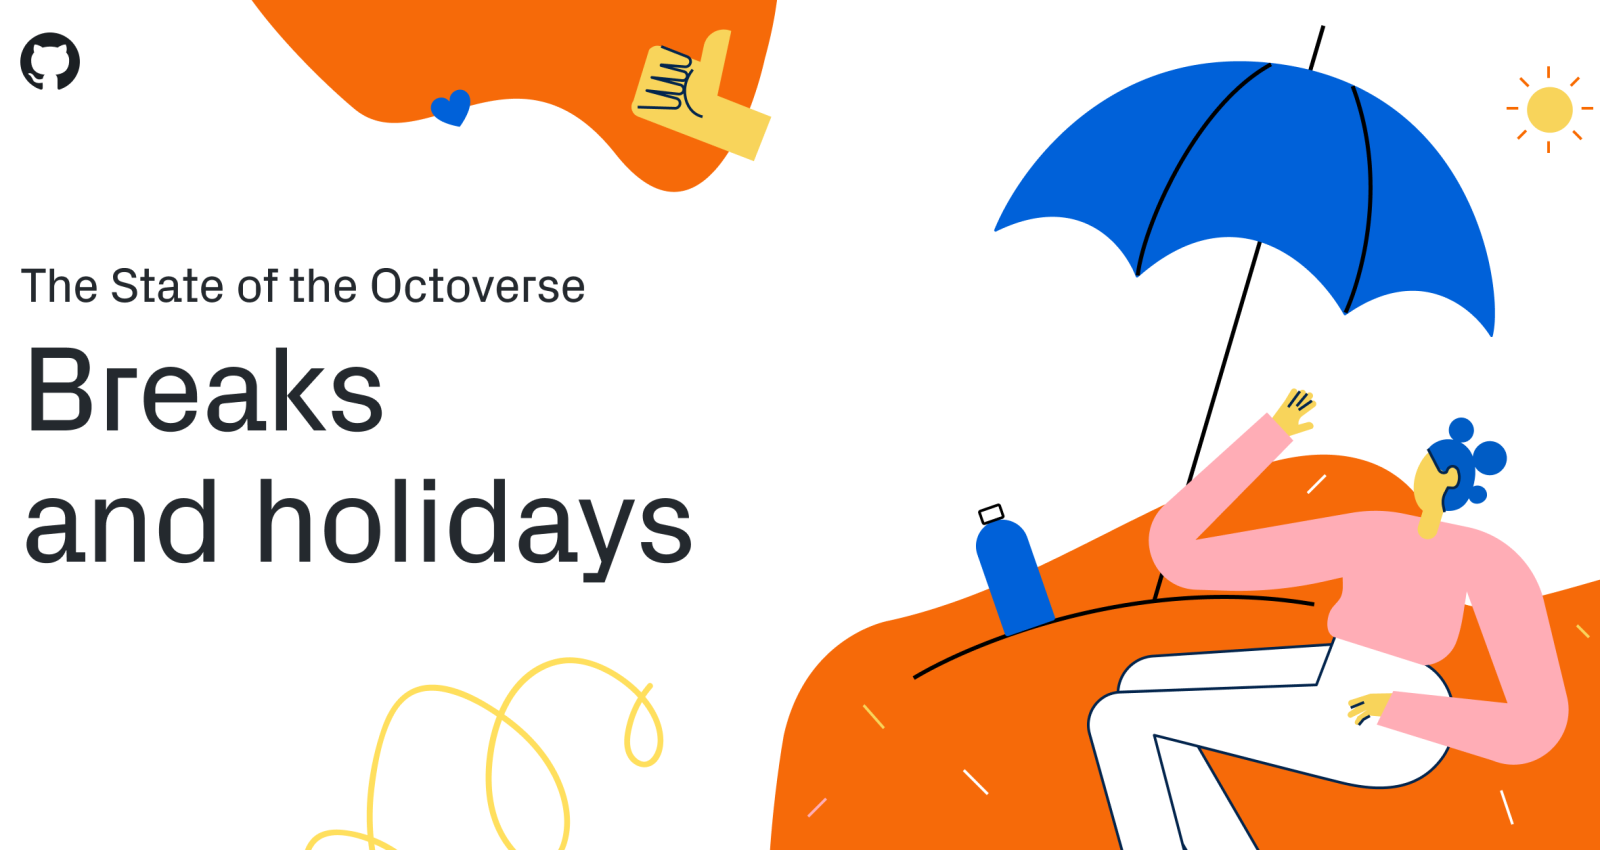 The State of the Octoverse: breaks and holidays